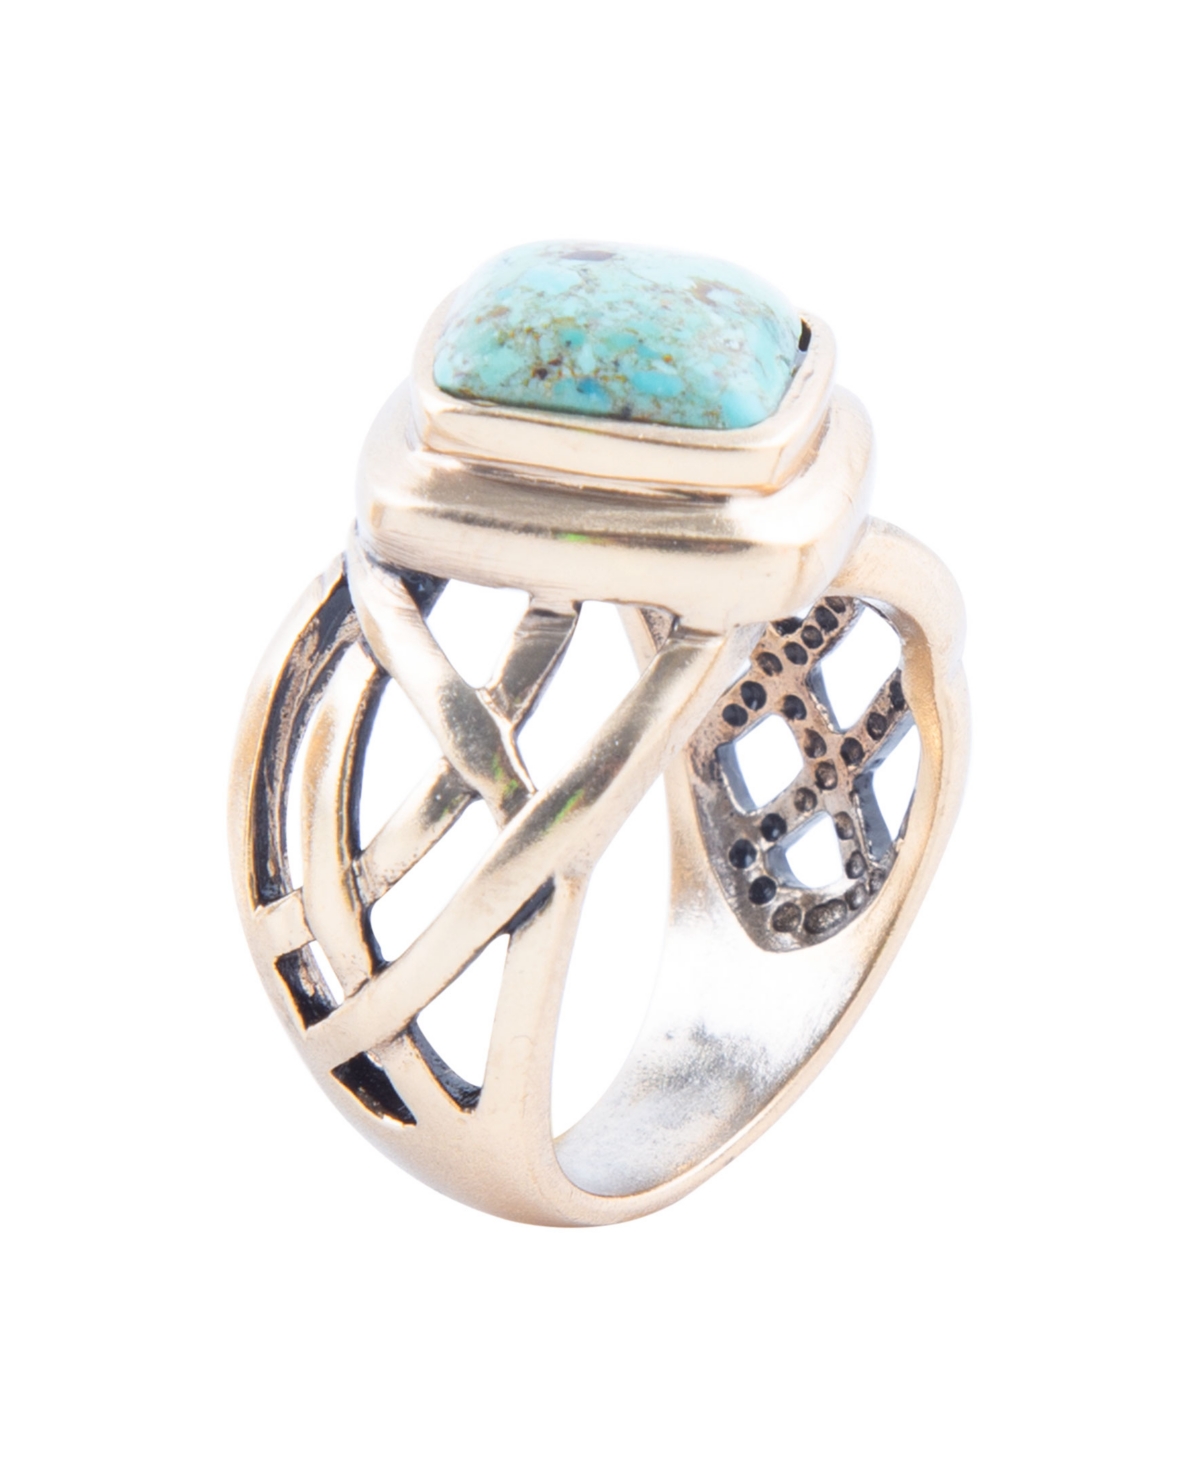 Marvelous Bronze and Genuine Turquoise Band Ring - Turquoise